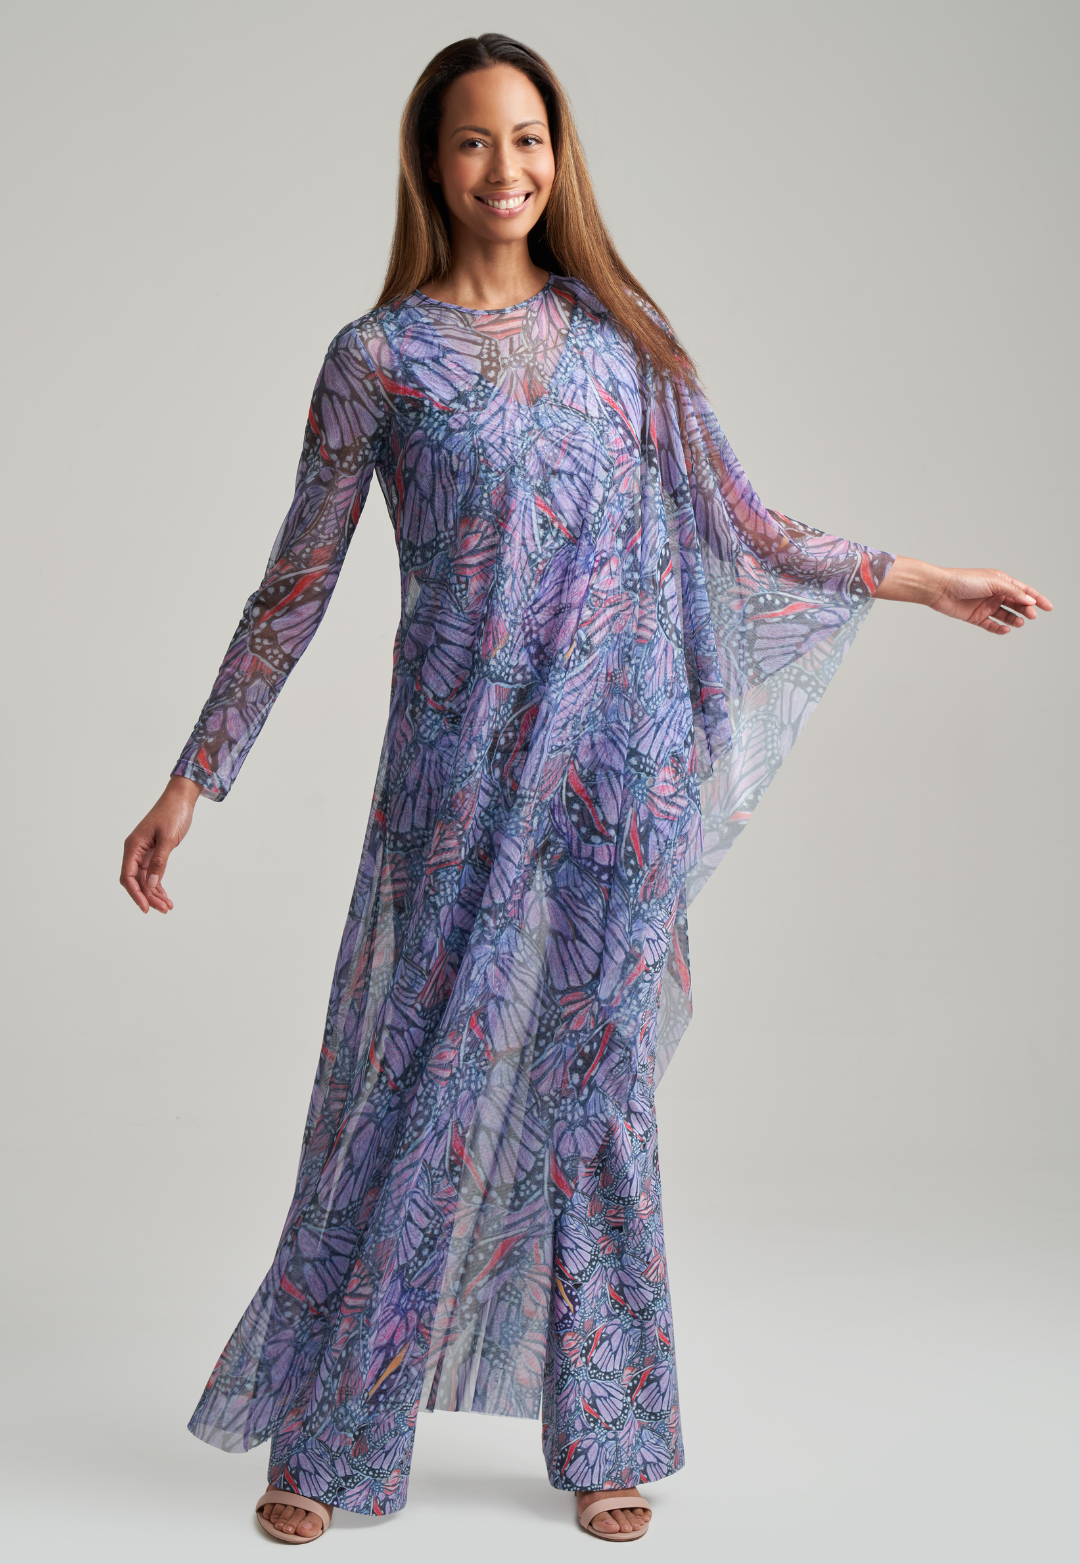 Woman wearing butterfly printed stretch knit purple pants with butterfly printed purple stretch knit tank top under sheer mesh butterfly printed poncho by Ala von Auersperg for spring summer 2021